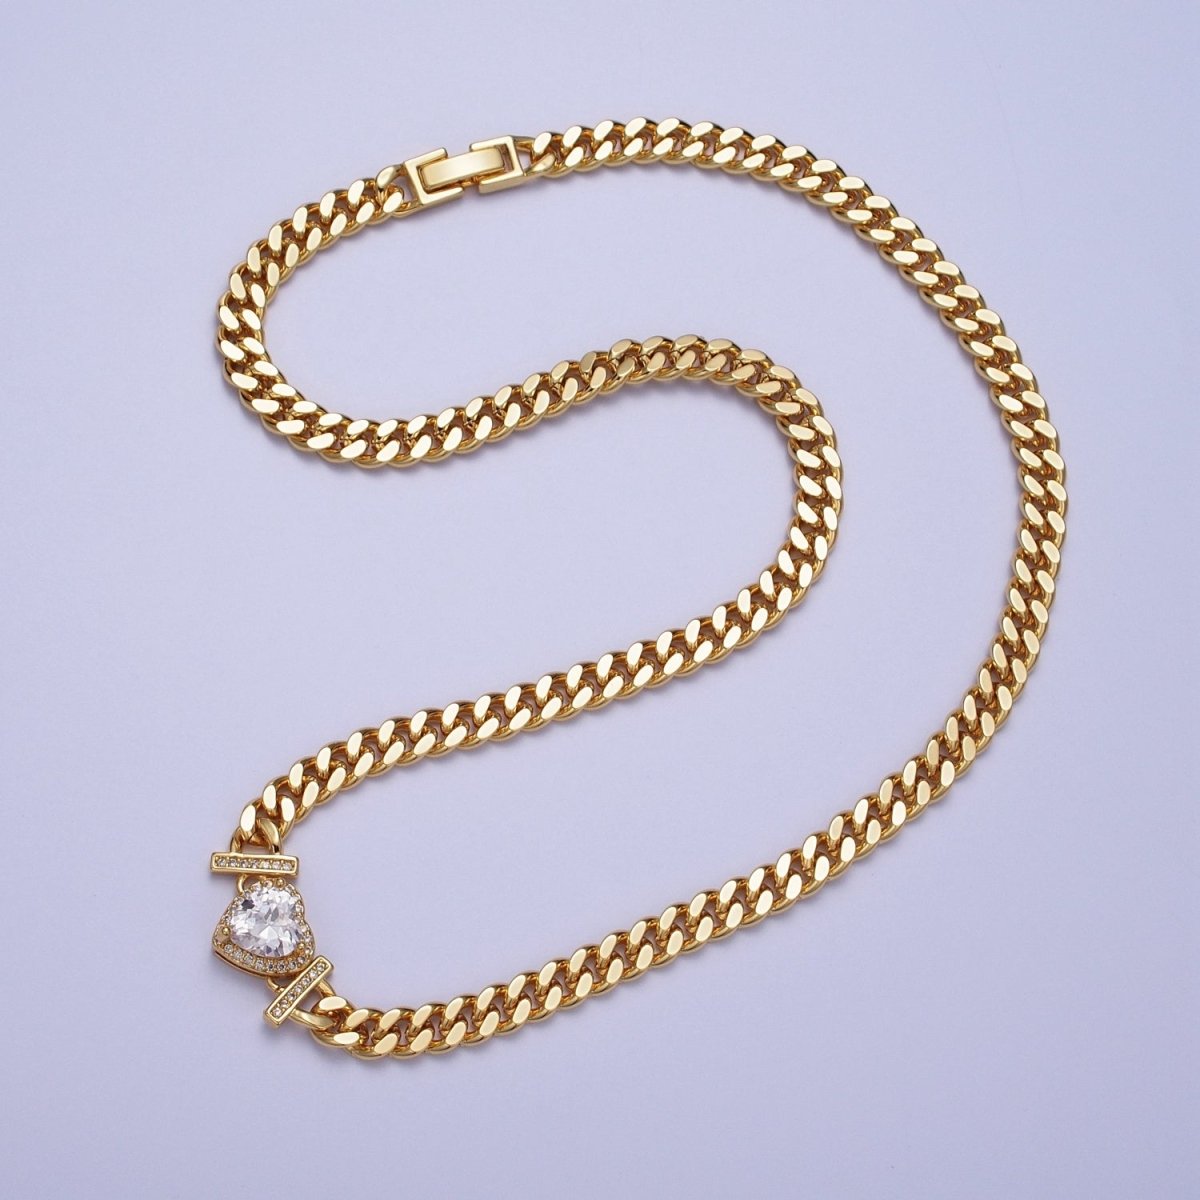 Micro Paved Heart Cubic Zirconia Stones Gold Cuban Curb Chain Necklace | WA-1091 - WA-1097 Clearance Pricing - DLUXCA